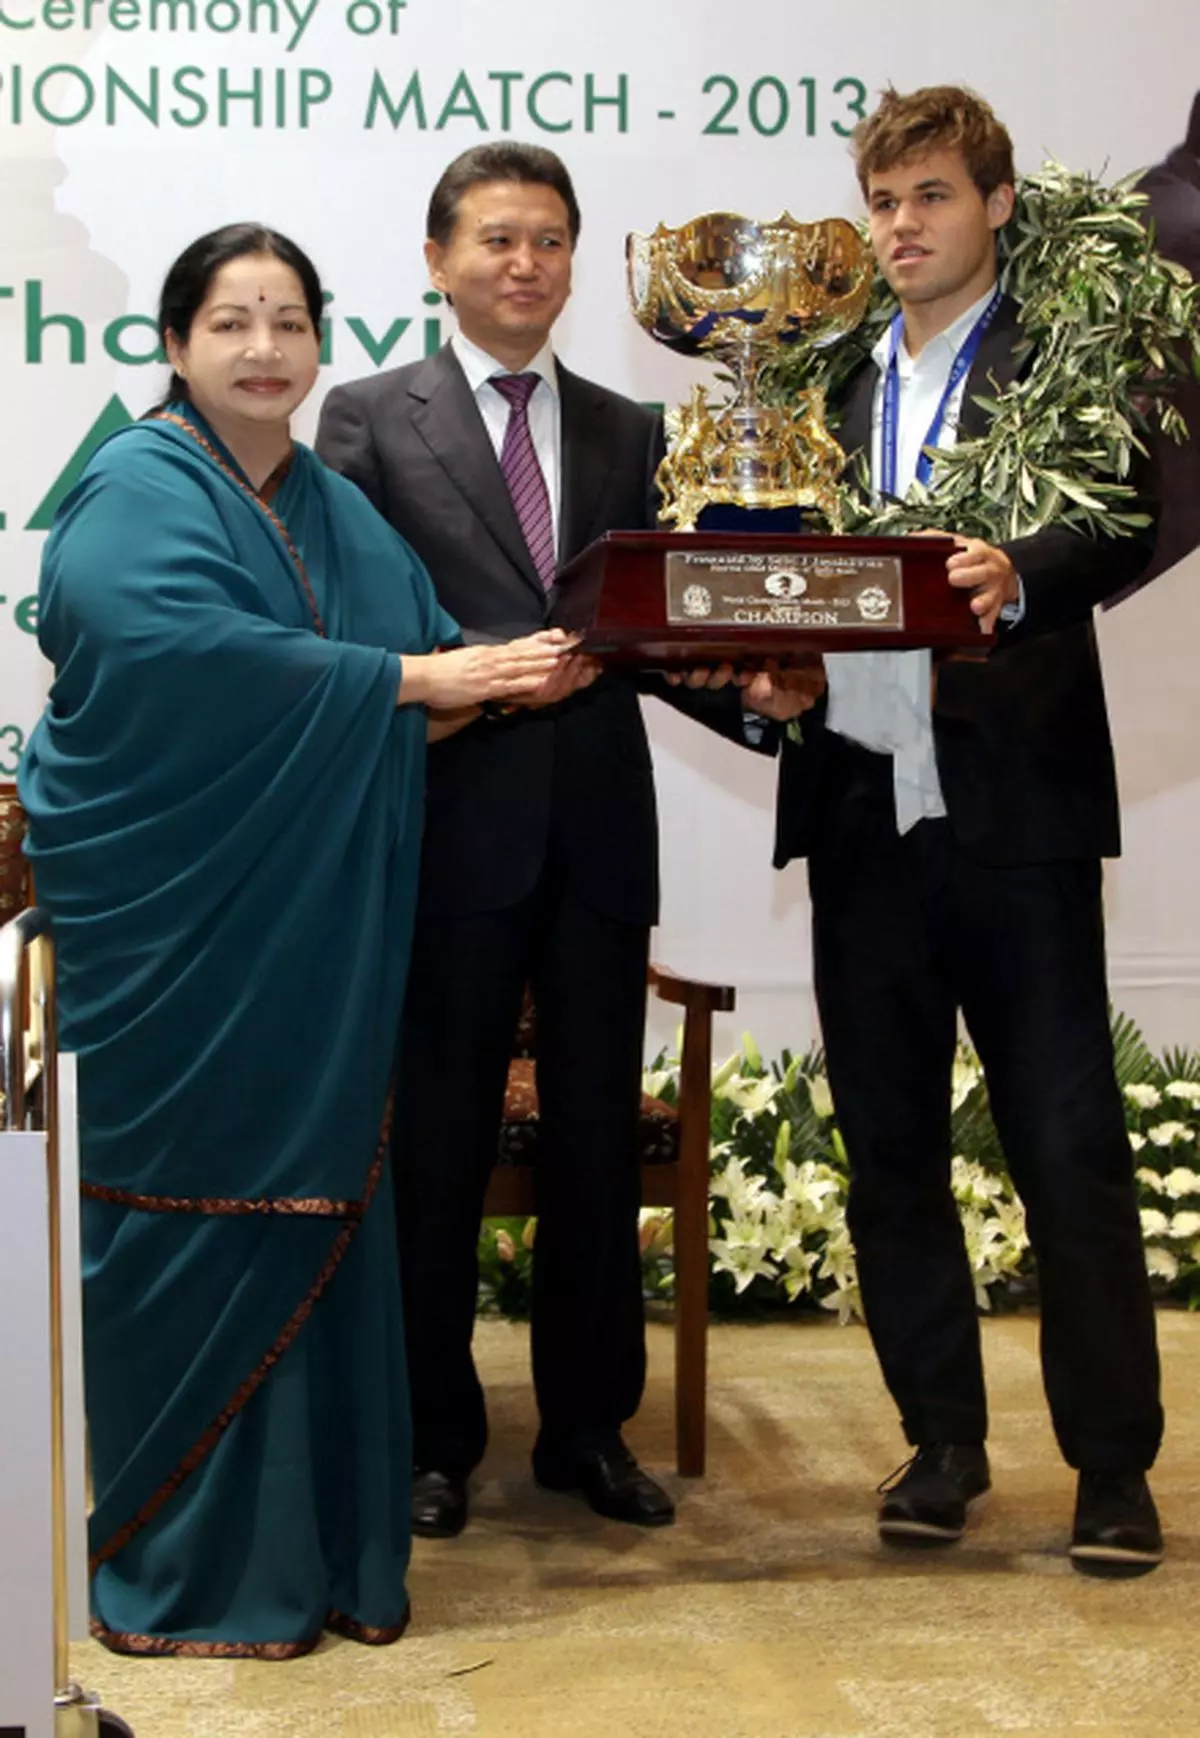 New world Chess champ takes home over Rs 9 cr prize money - The